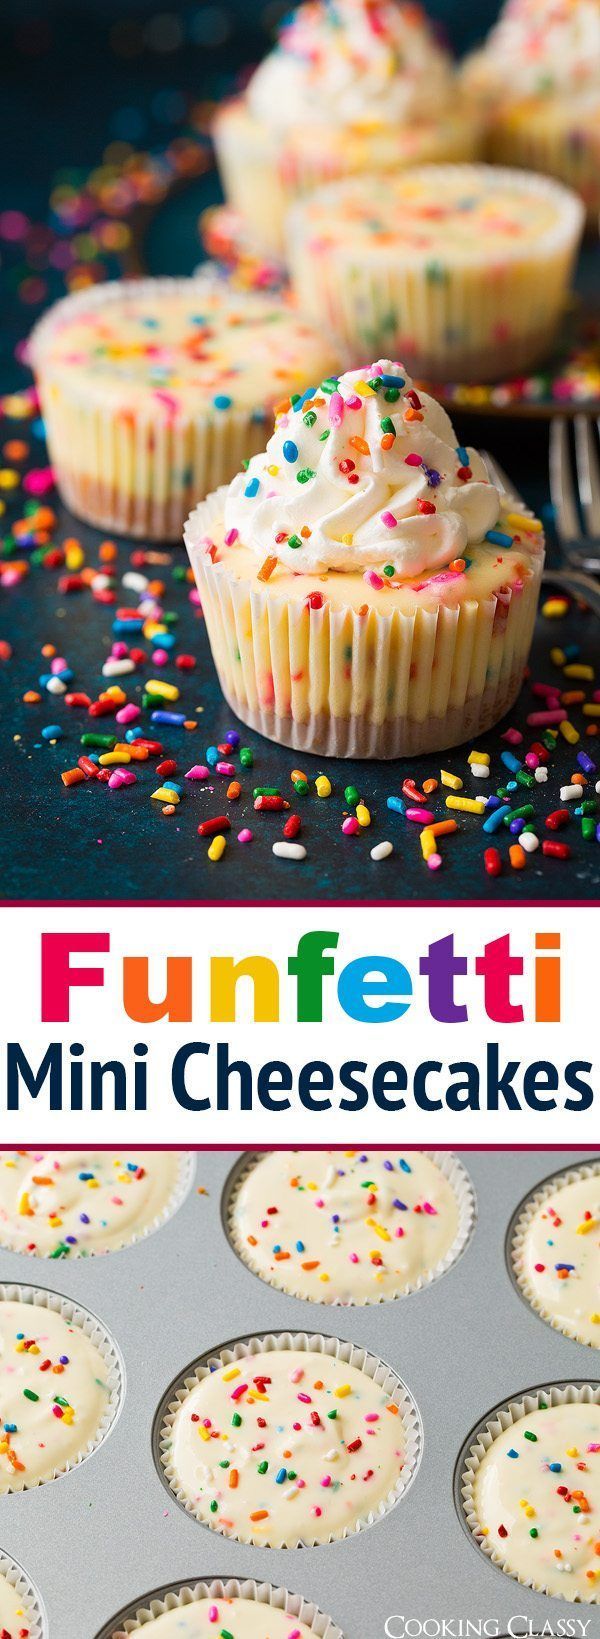 Funfetti Mini Cheesecakes - Cooking Classy -   19 desserts Individual cooking ideas